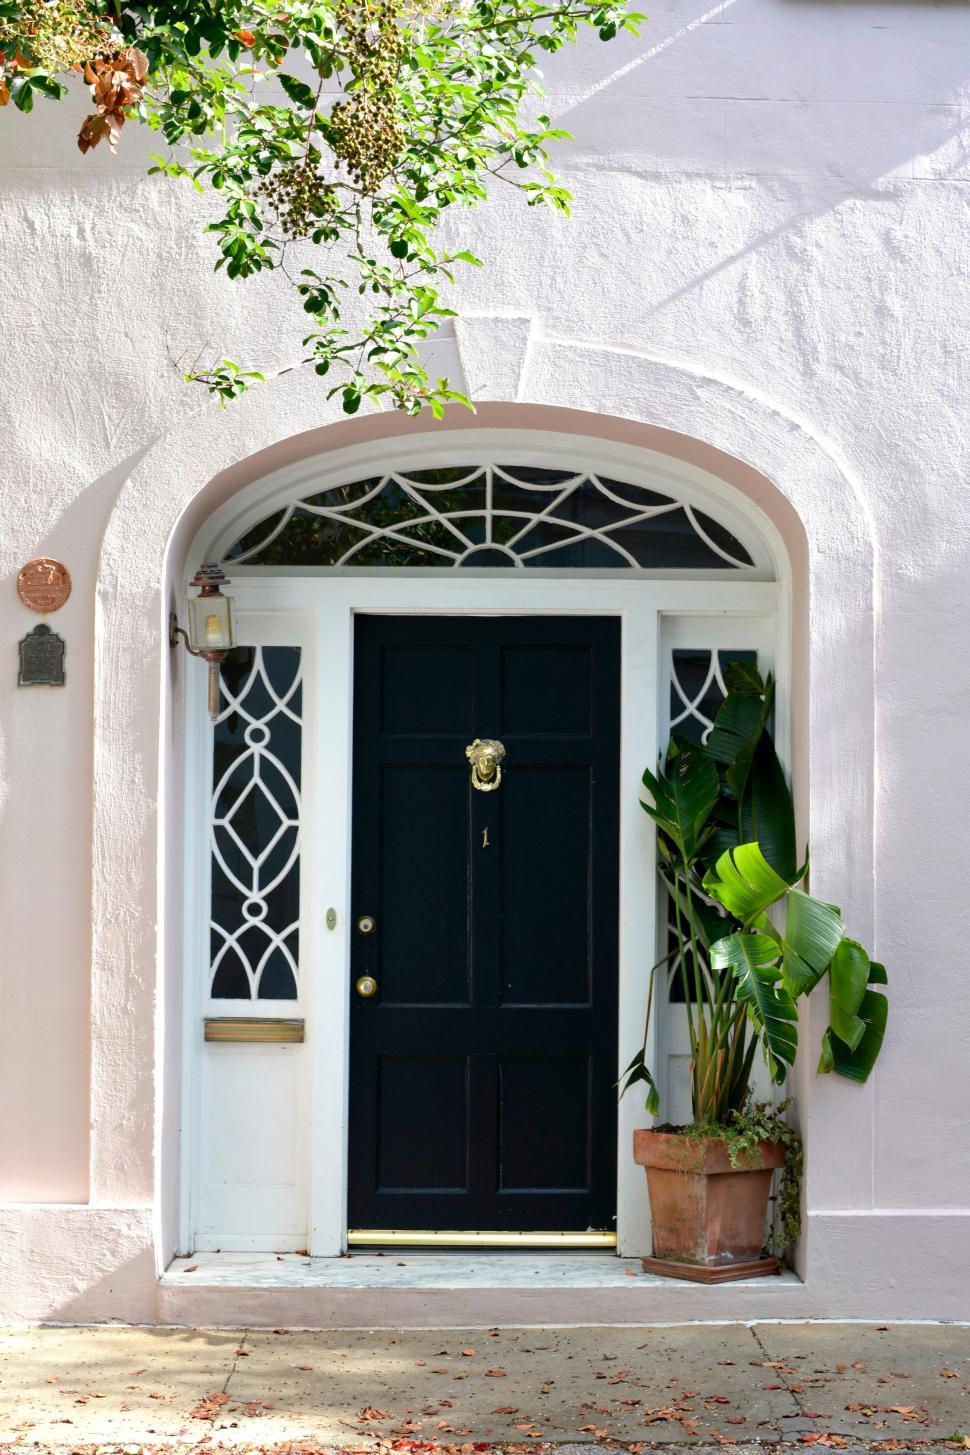 Free Image of Black Door With Potted Plant 